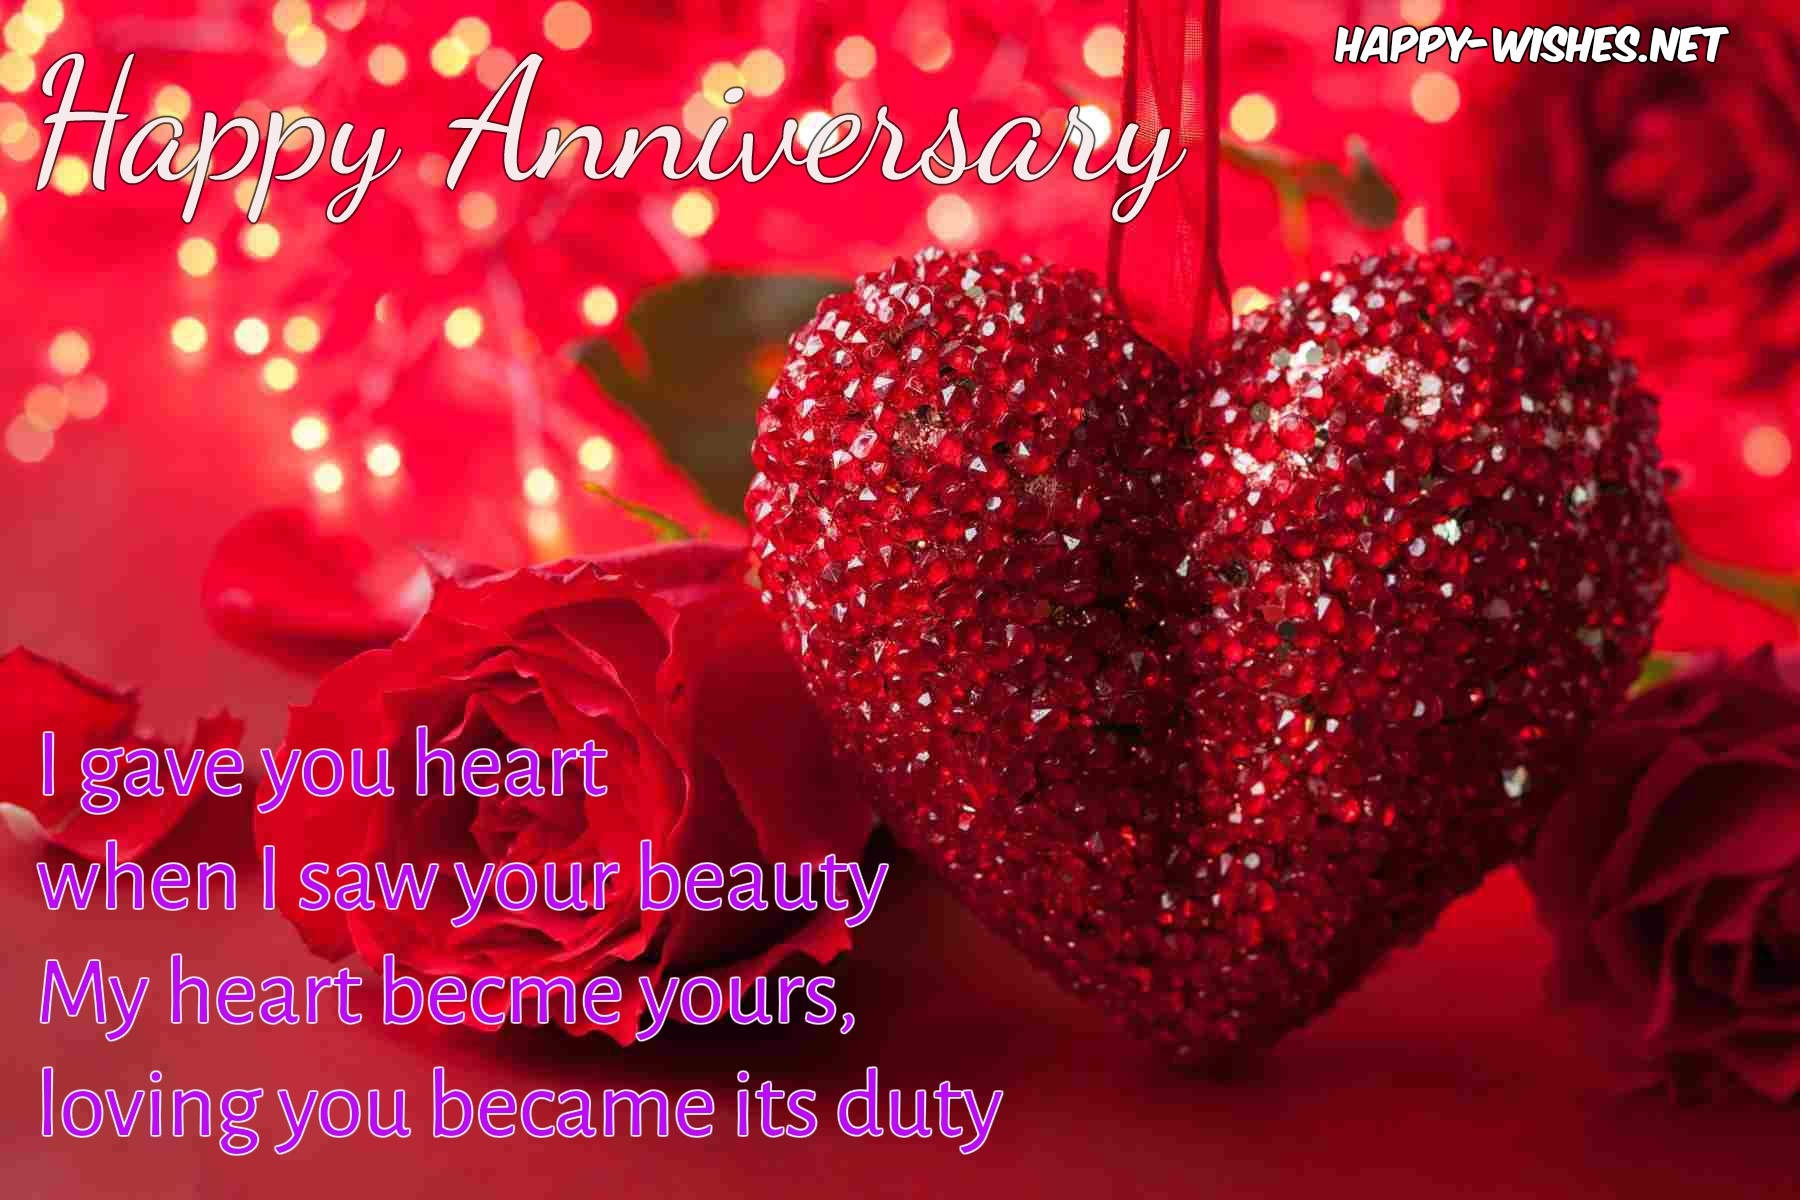 Happy Anniversary wishes for wife